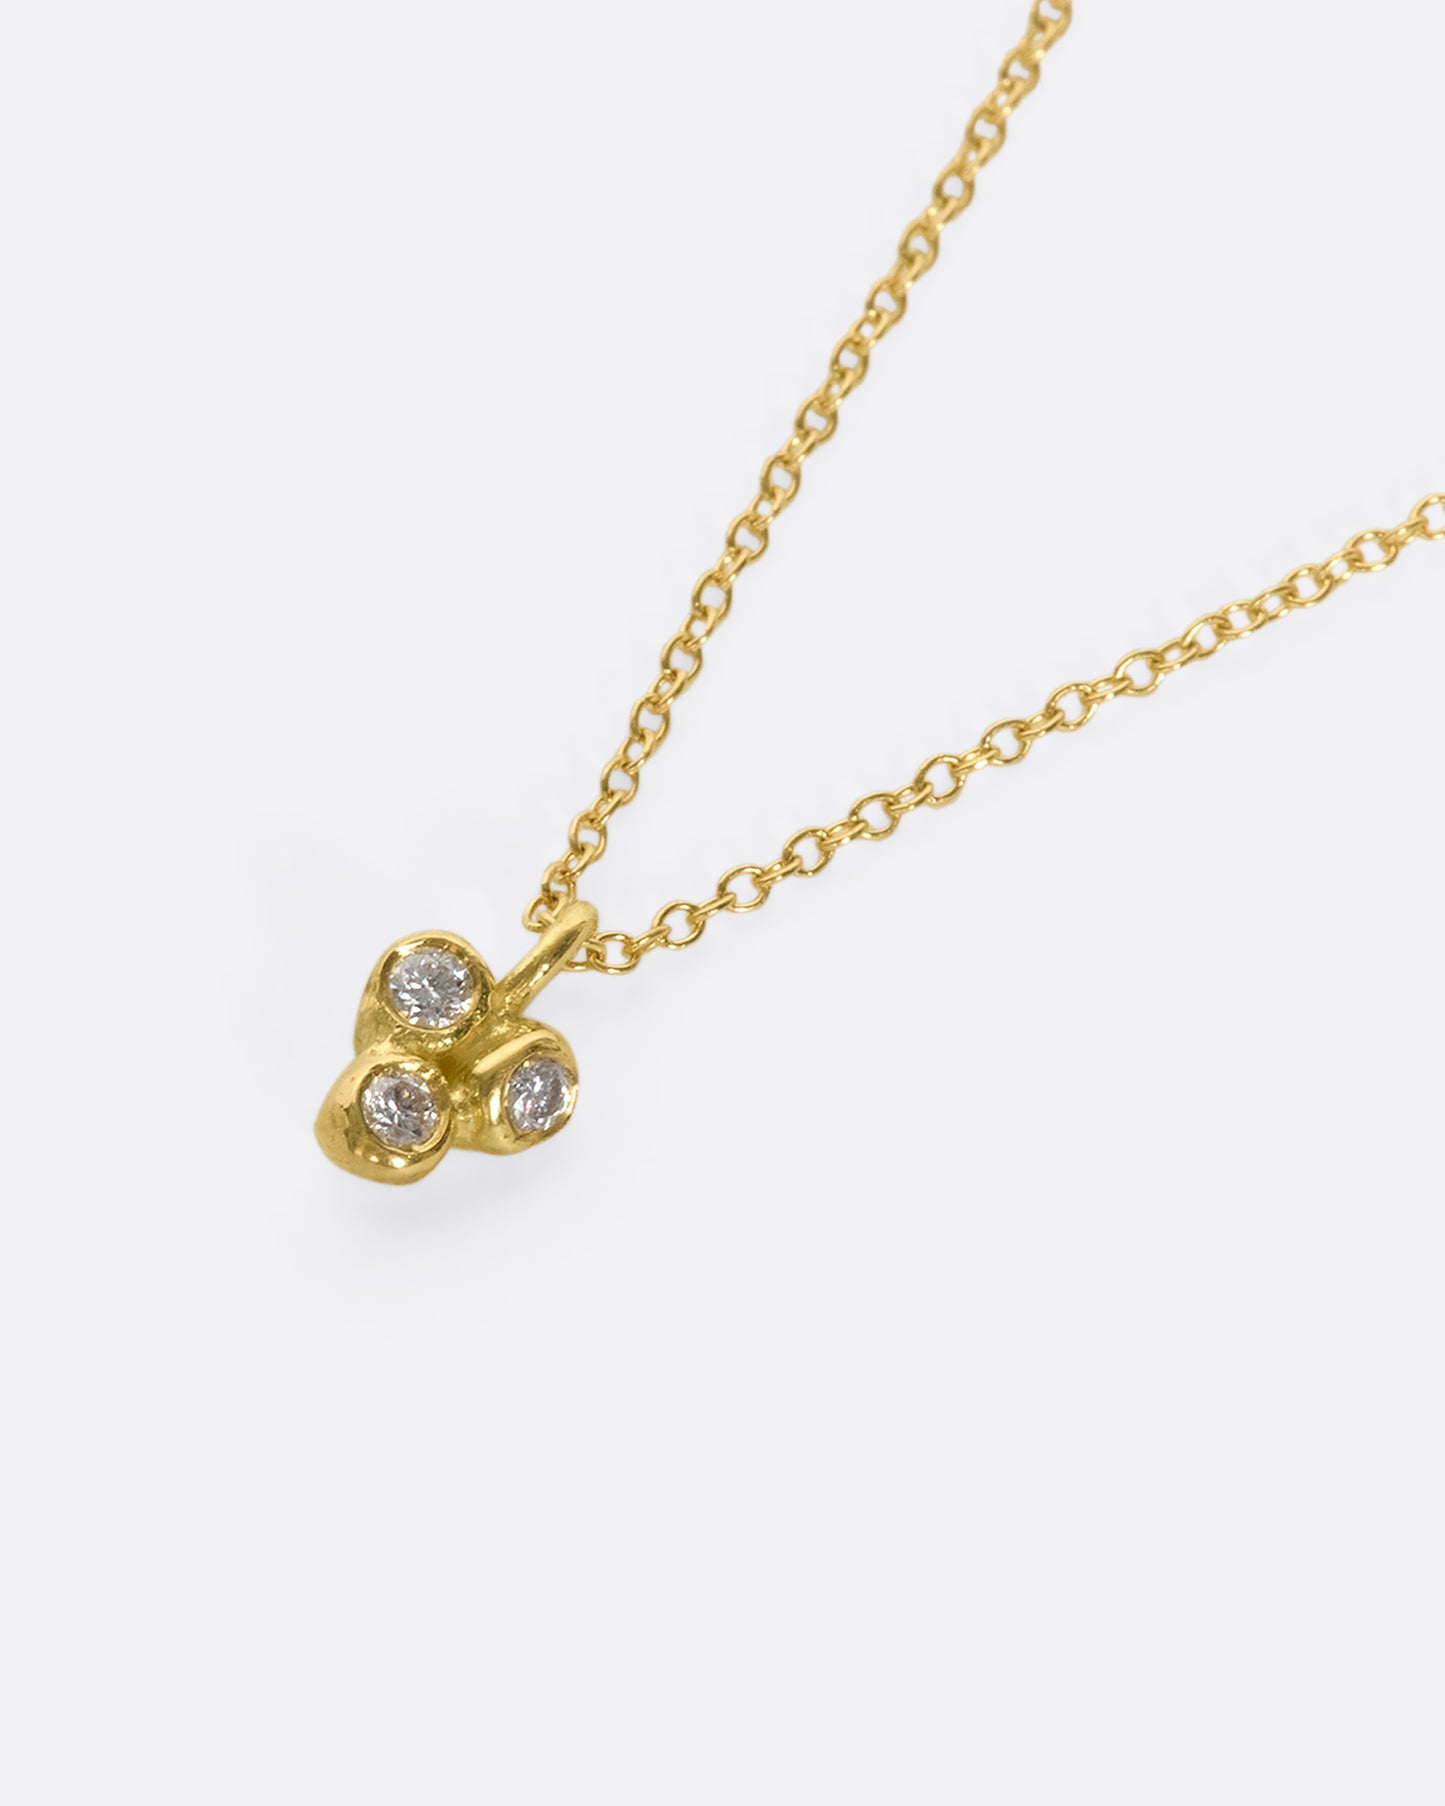 A dainty 18k gold and diamond pendant swinging on a fine gold chain